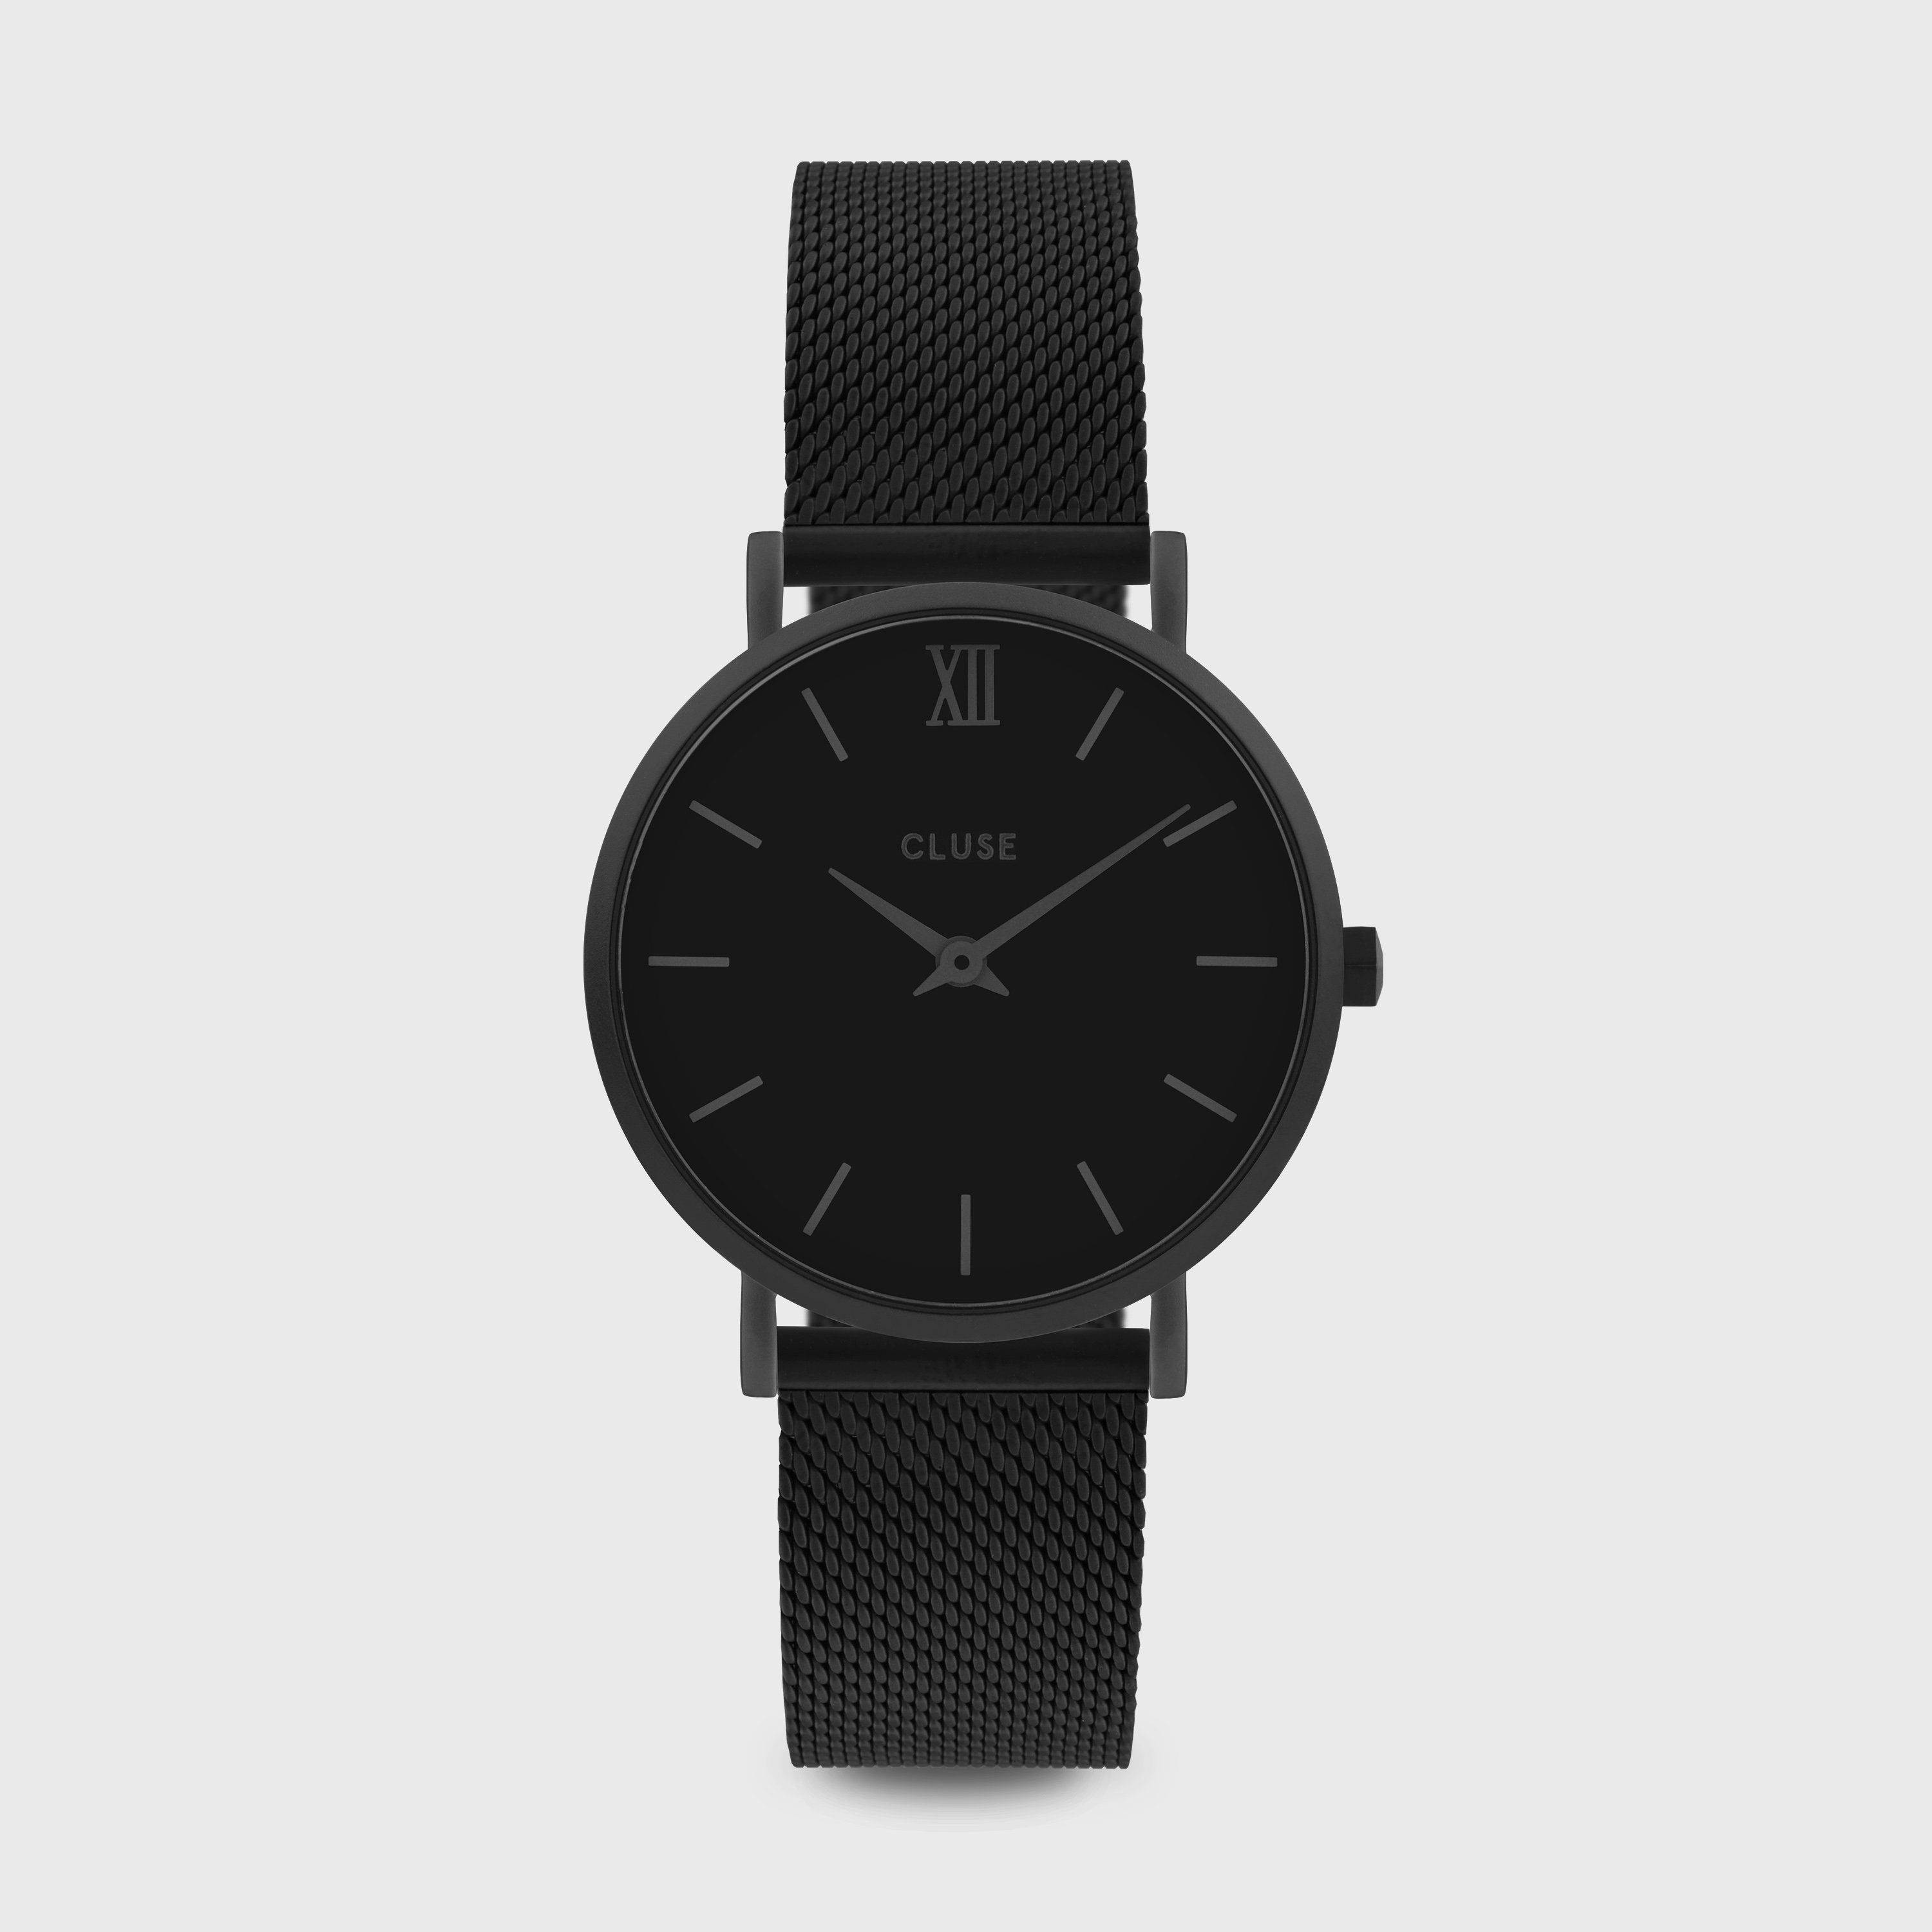 CLUSE Minuit Watch CW0101203012 Black - Official CLUSE Store